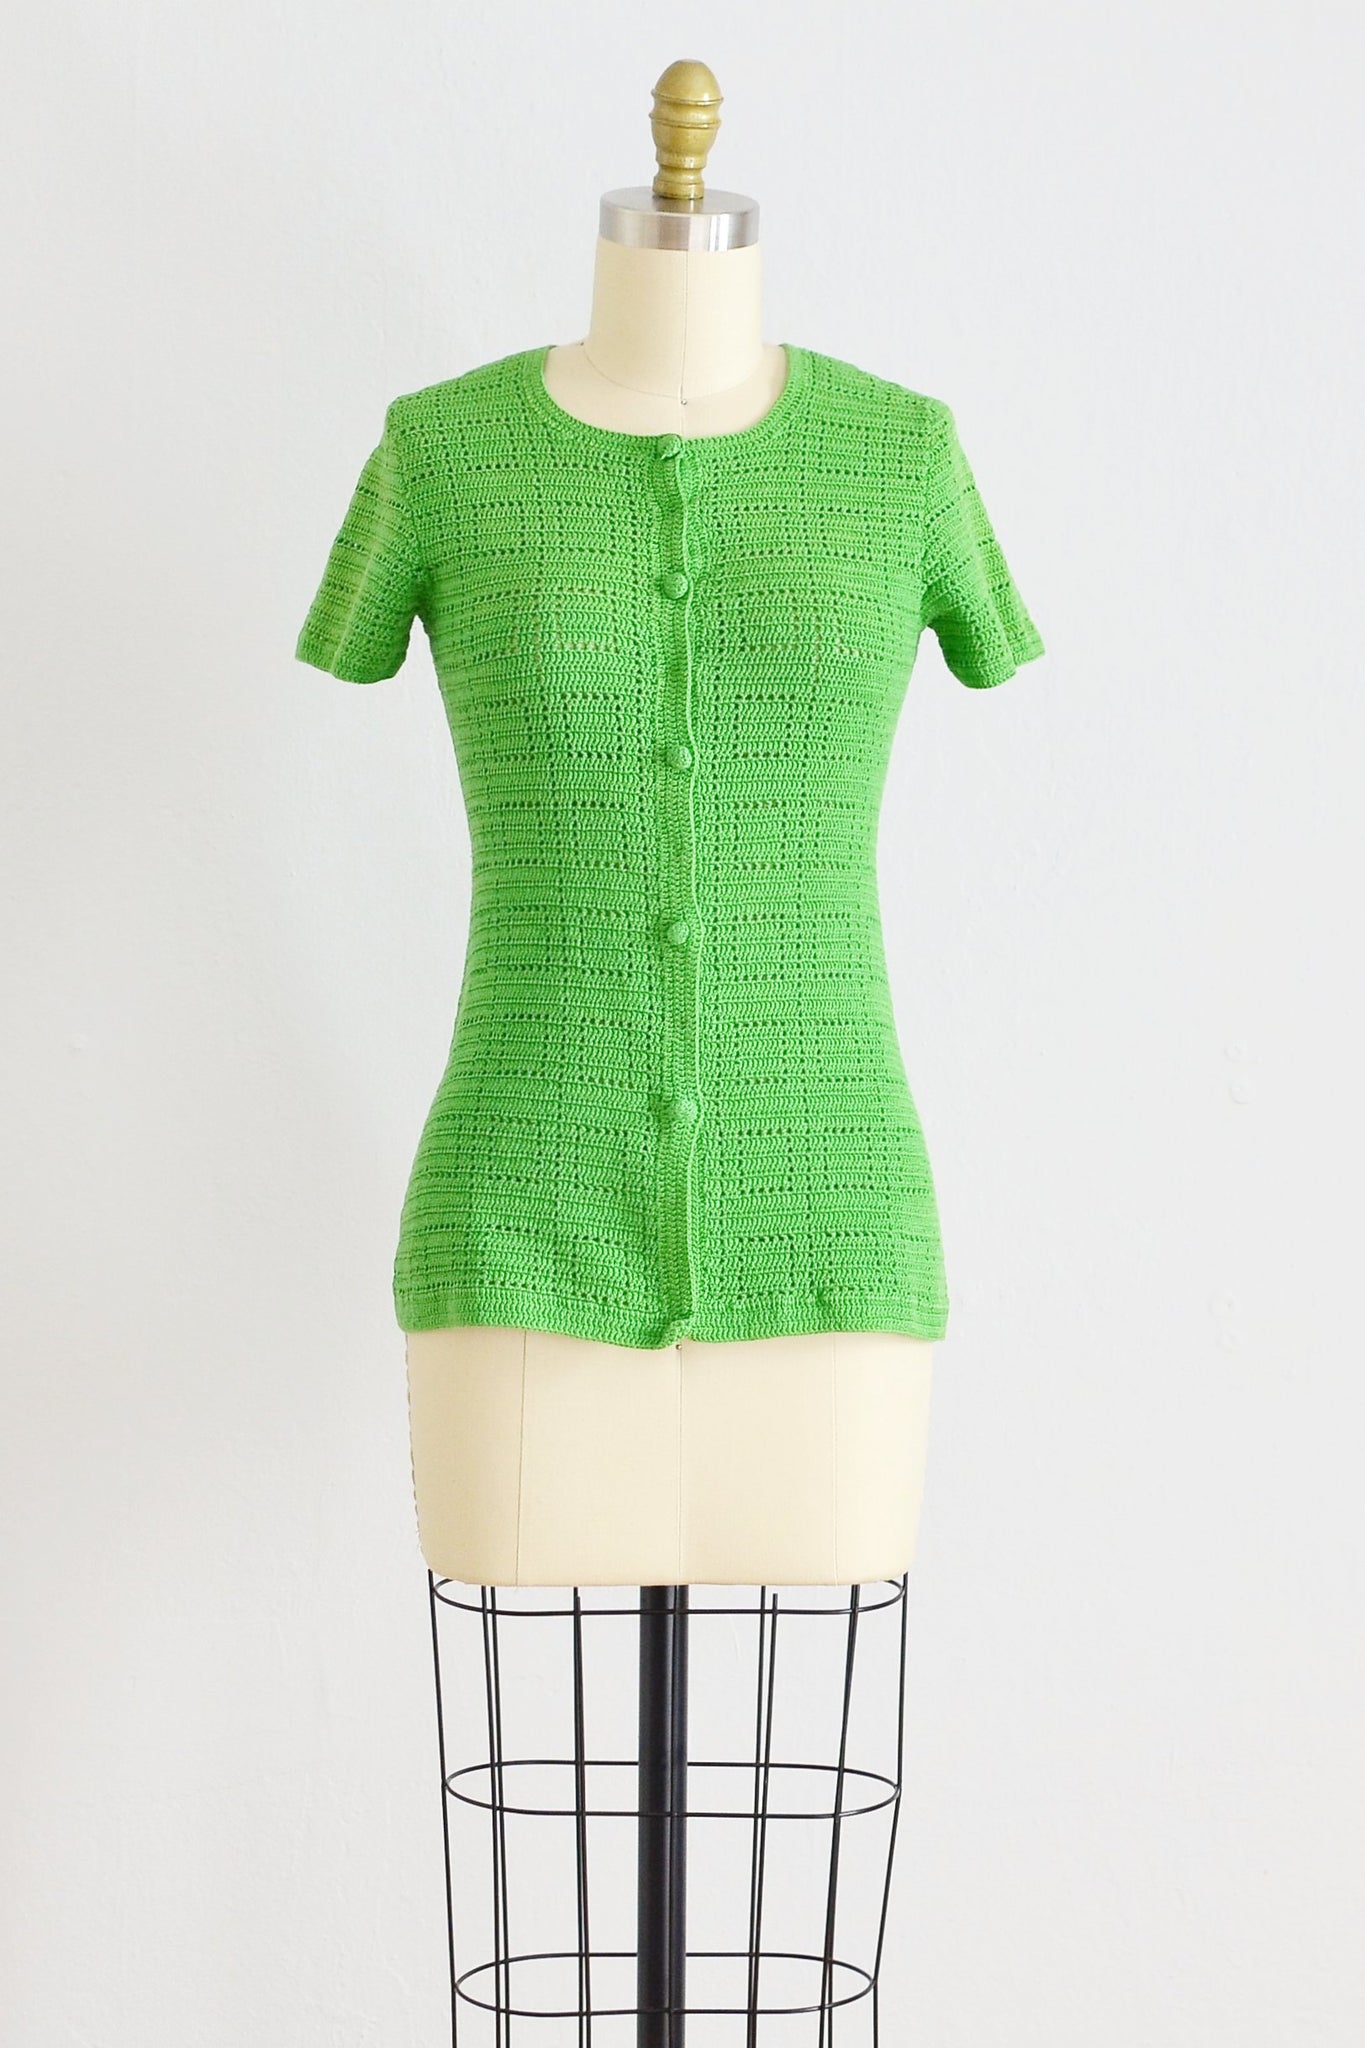 Green Crocheted Top - Pickled Vintage